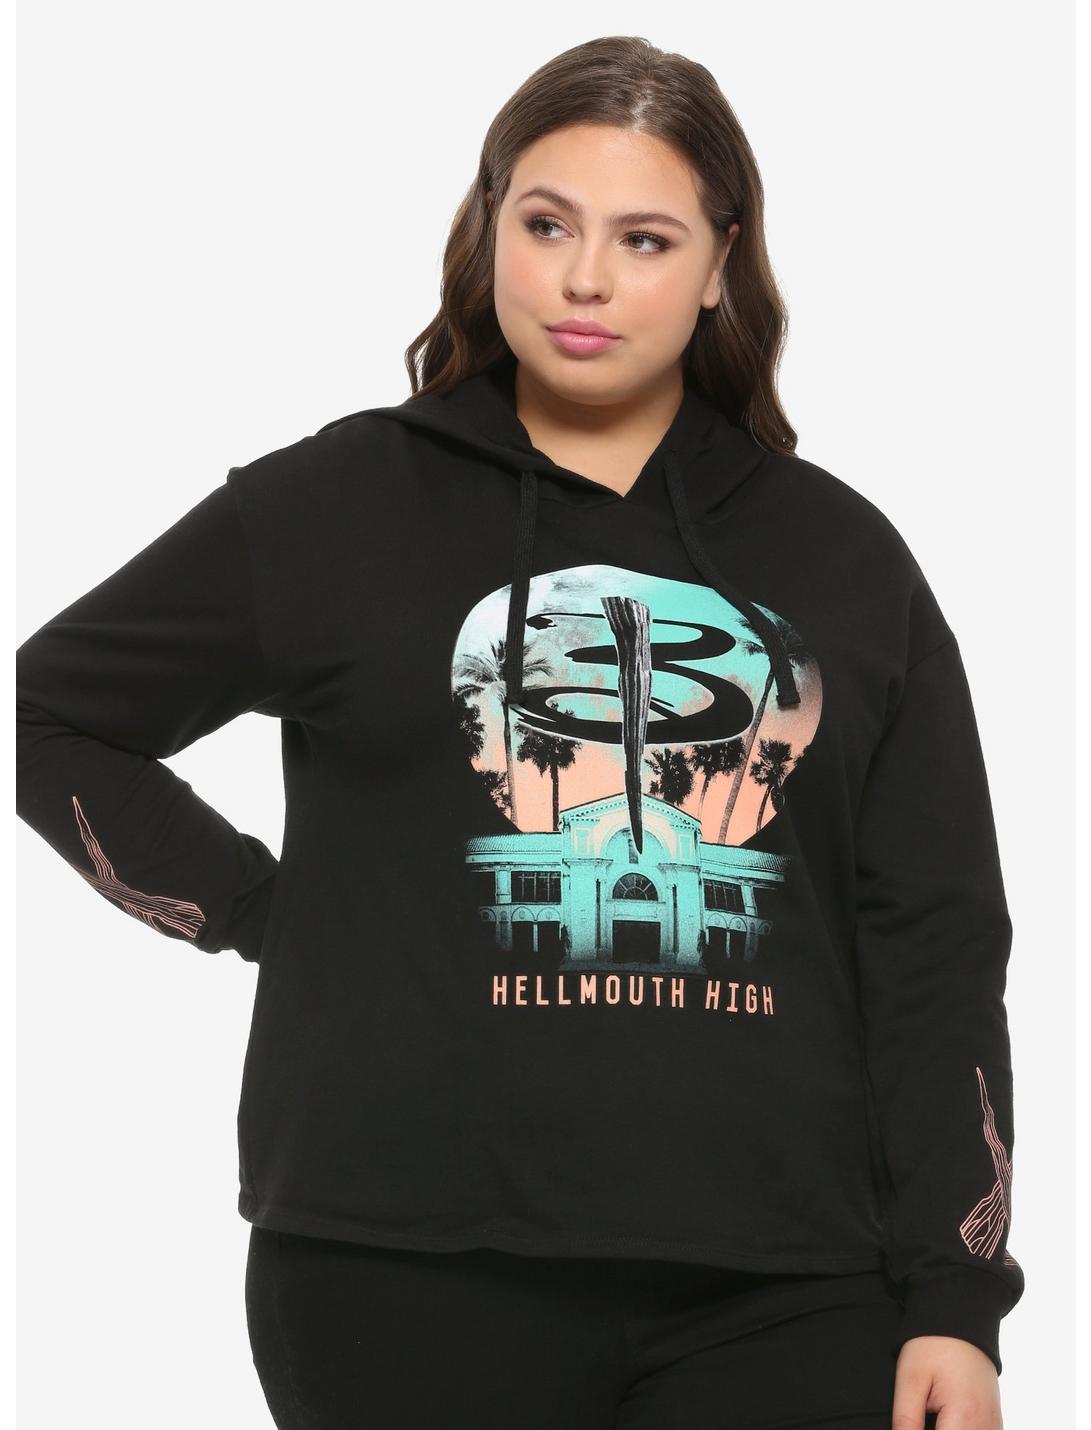 Buffy The Vampire Slayer Hellmouth High Girls Hoodie Plus Size, MULTI, hi-res